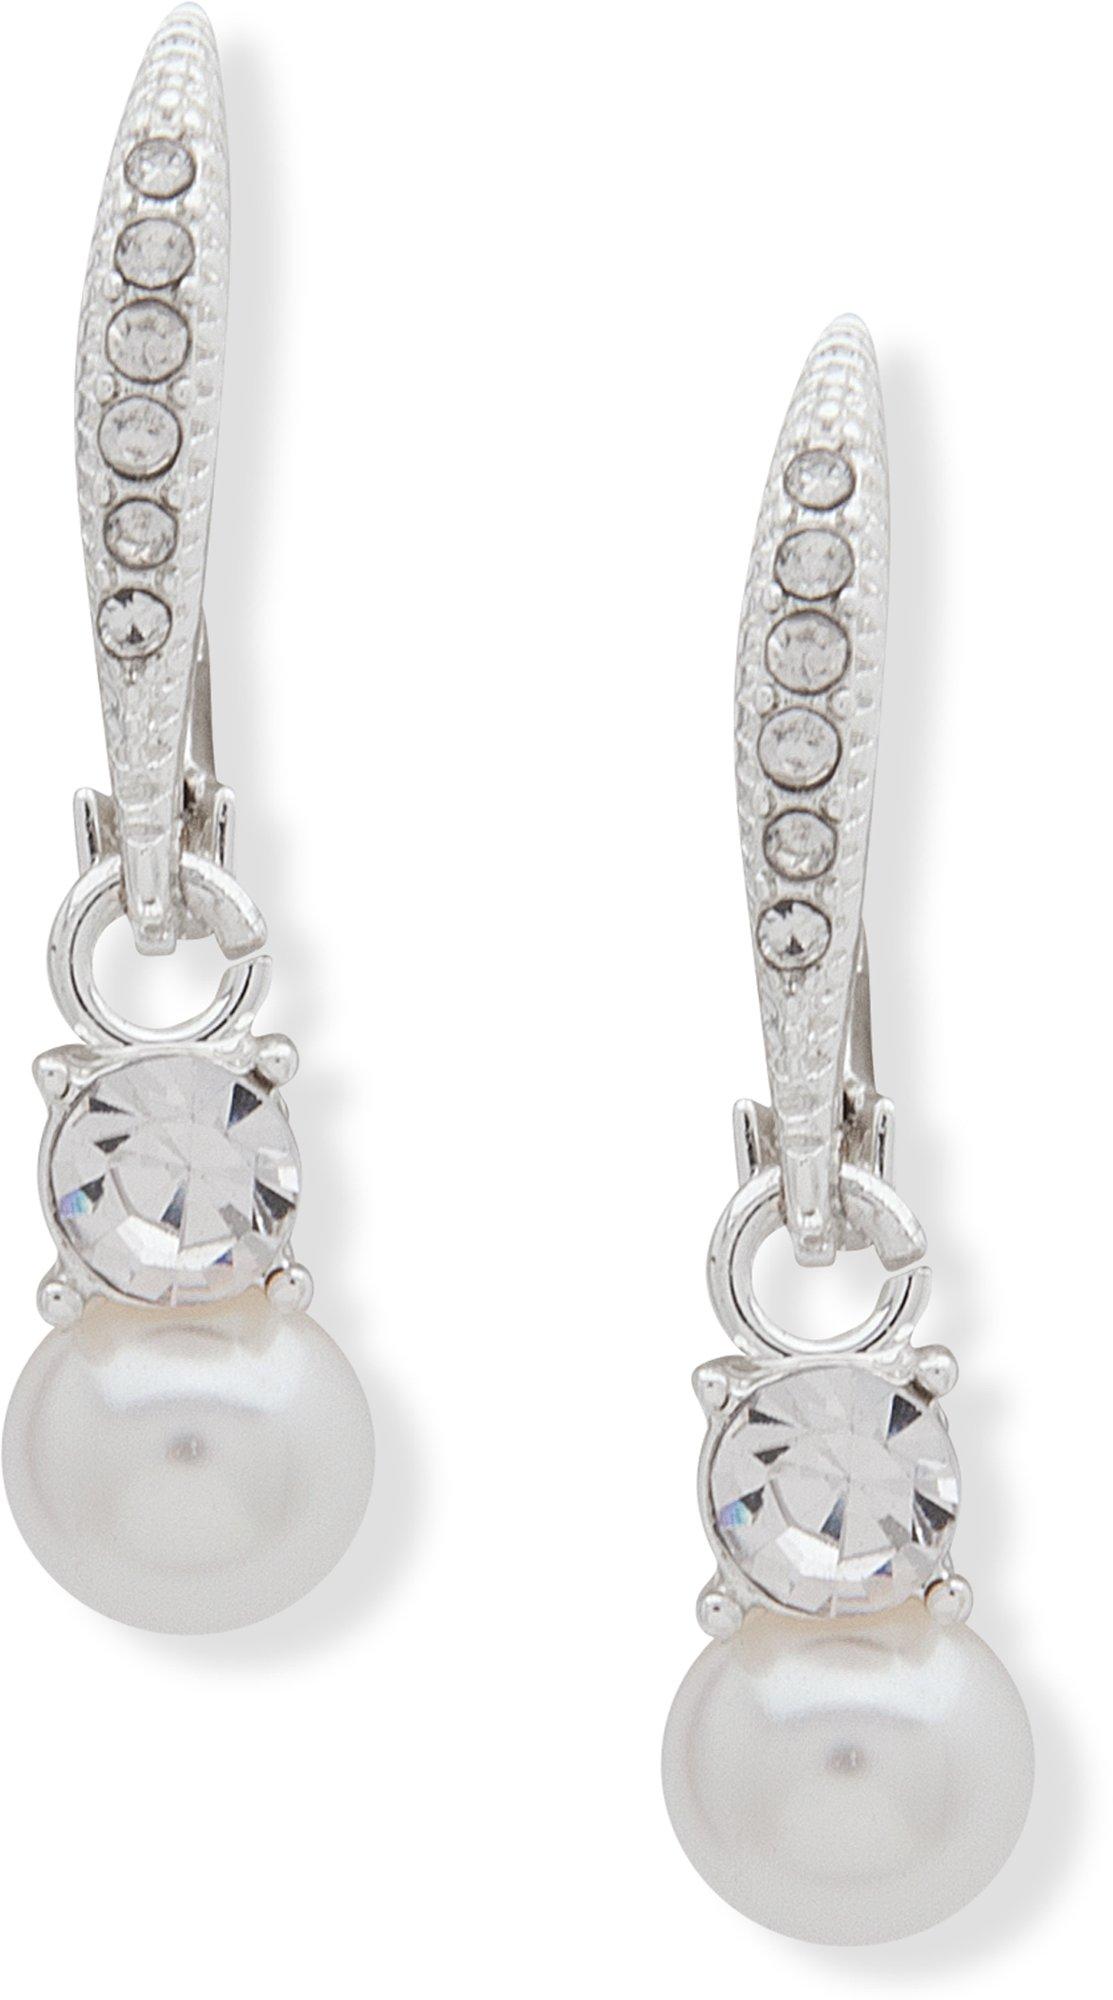 You're Invited Silver Tone Faux Pearl Drop Earrings